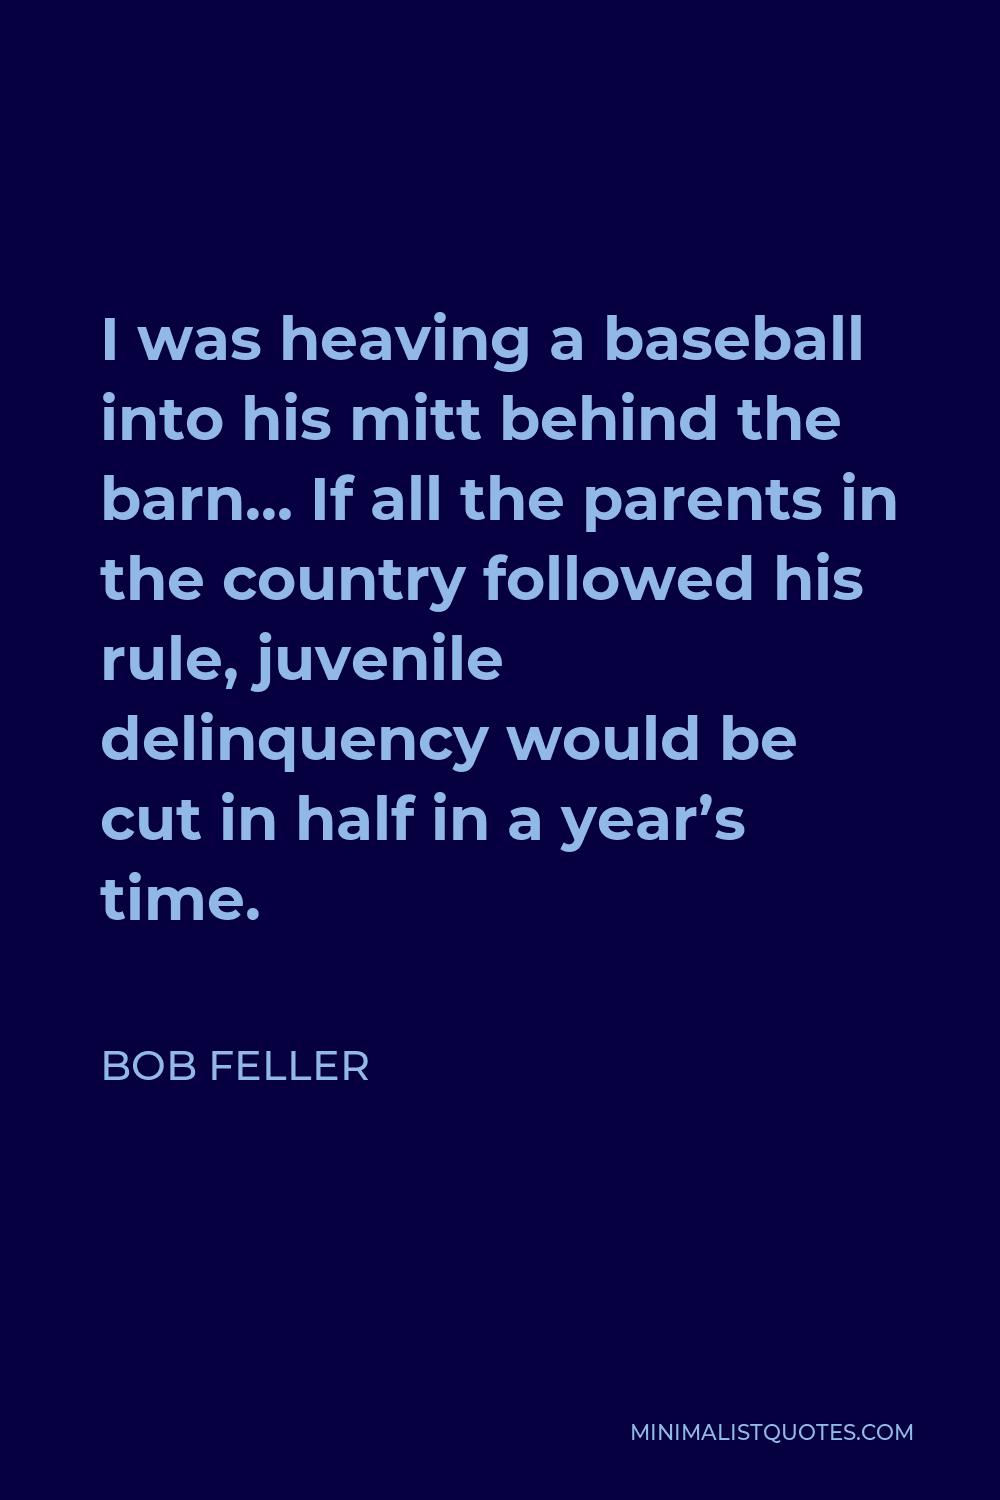 Bob Feller Quote: “My father loved baseball and he cultivated my talent. I  don't think he ever had any doubt in his mind that I would play ”